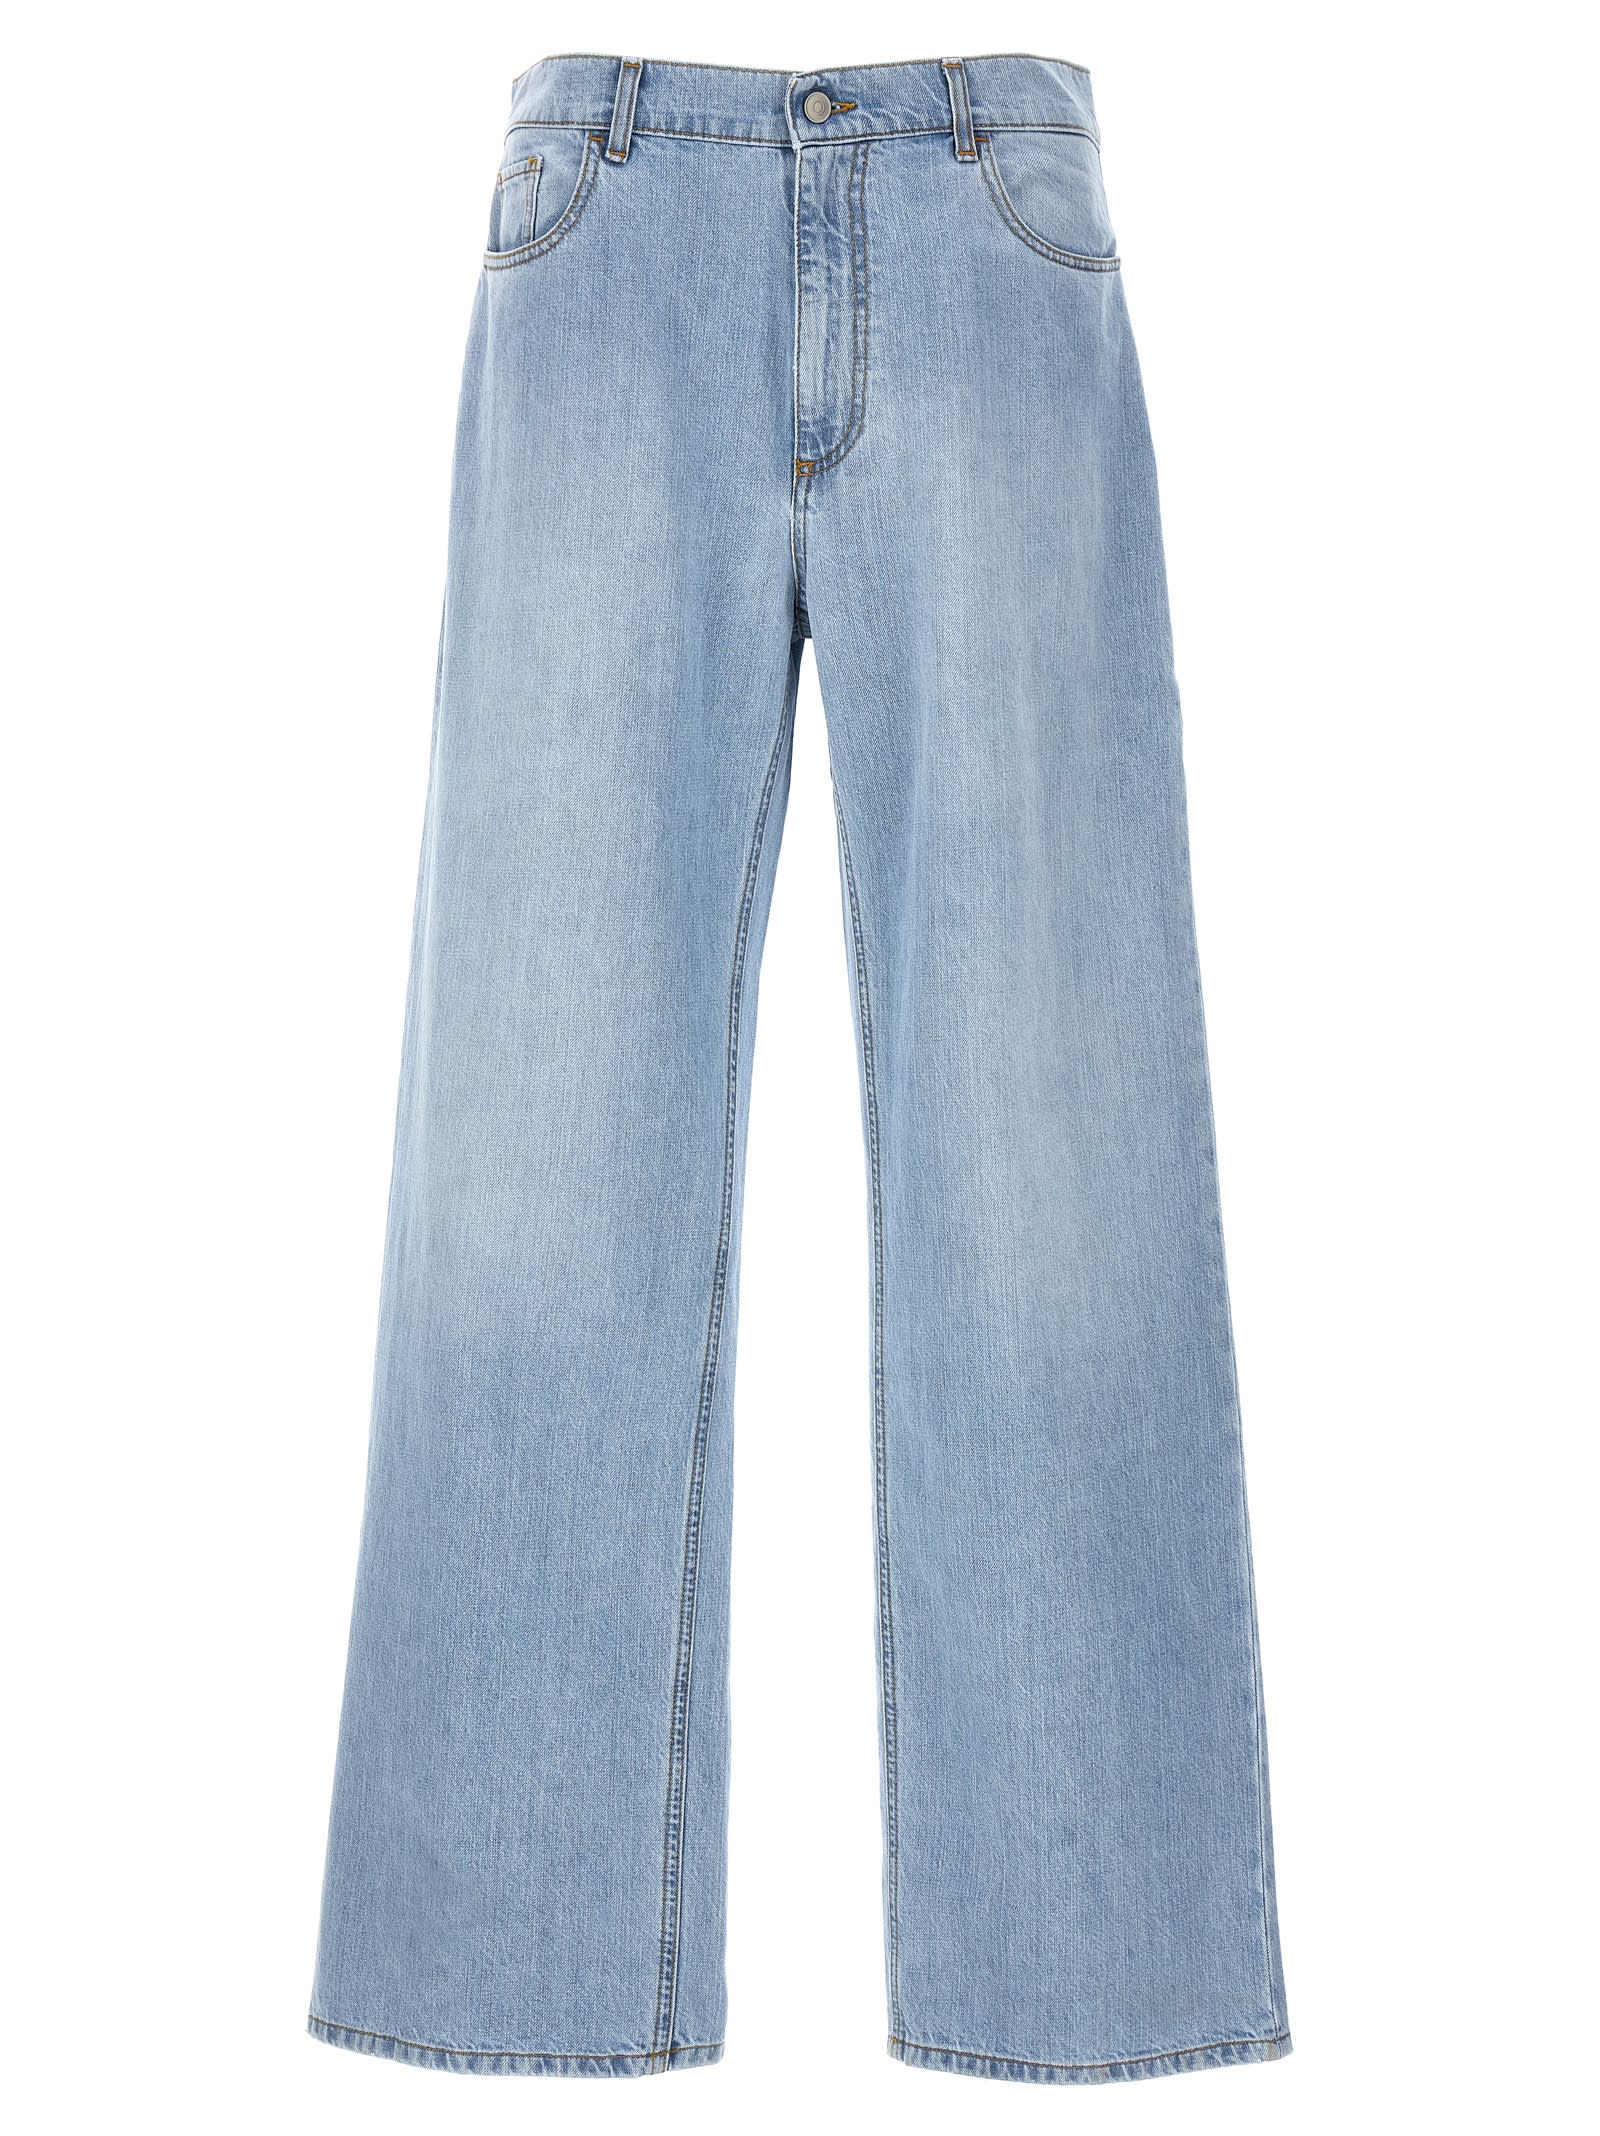 ALYX WIDE LEG WITH BUCKLE JEANS